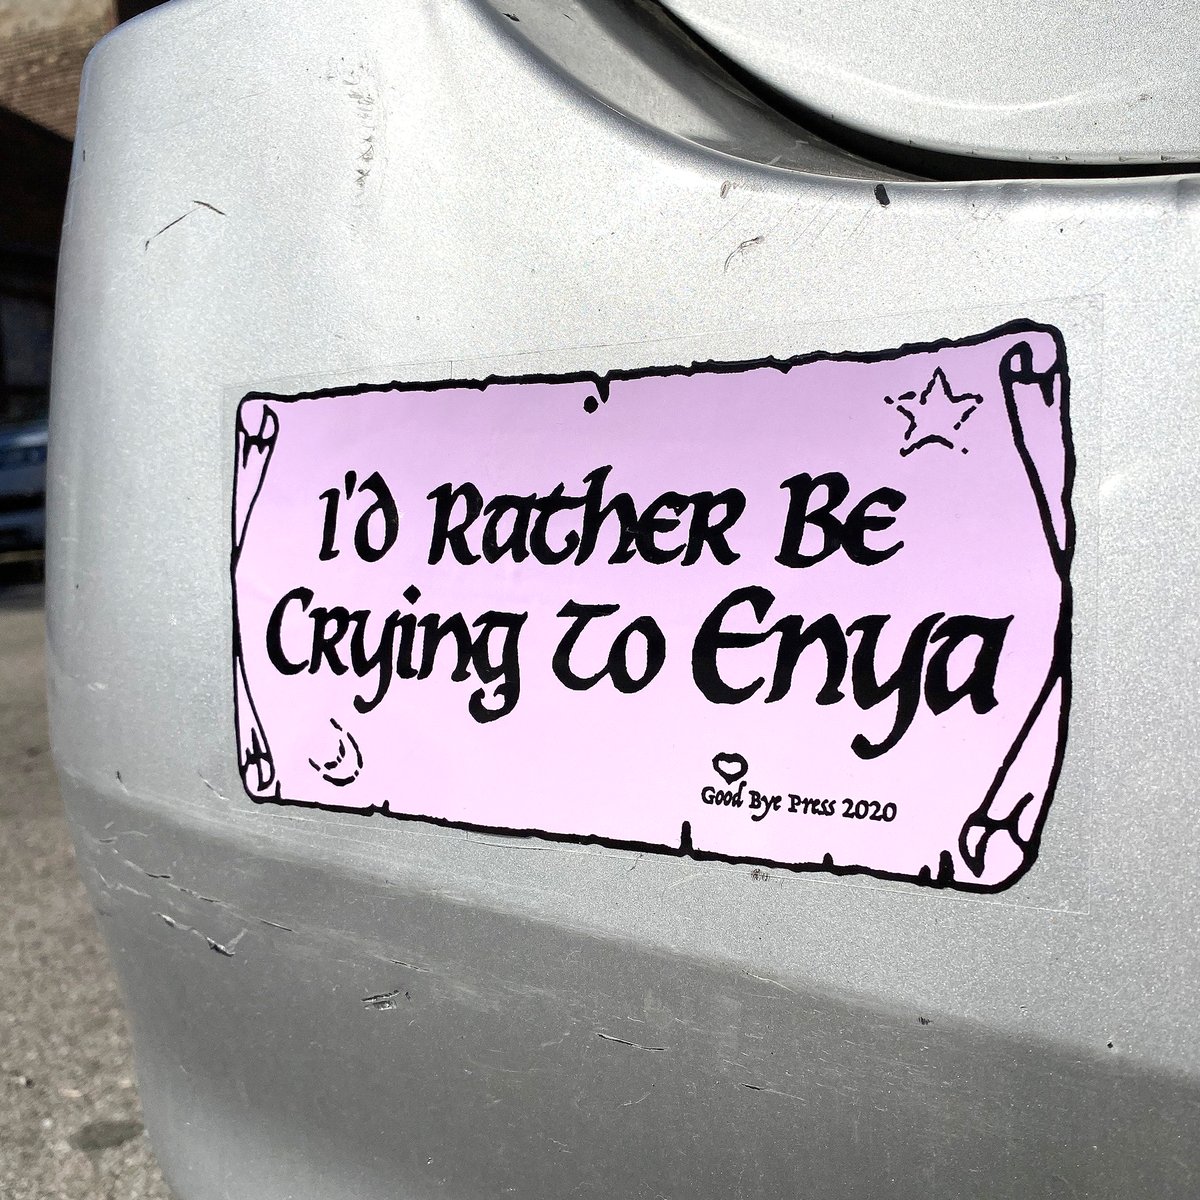 "I'd Rather Be Crying To Enya" Bumper Sticker